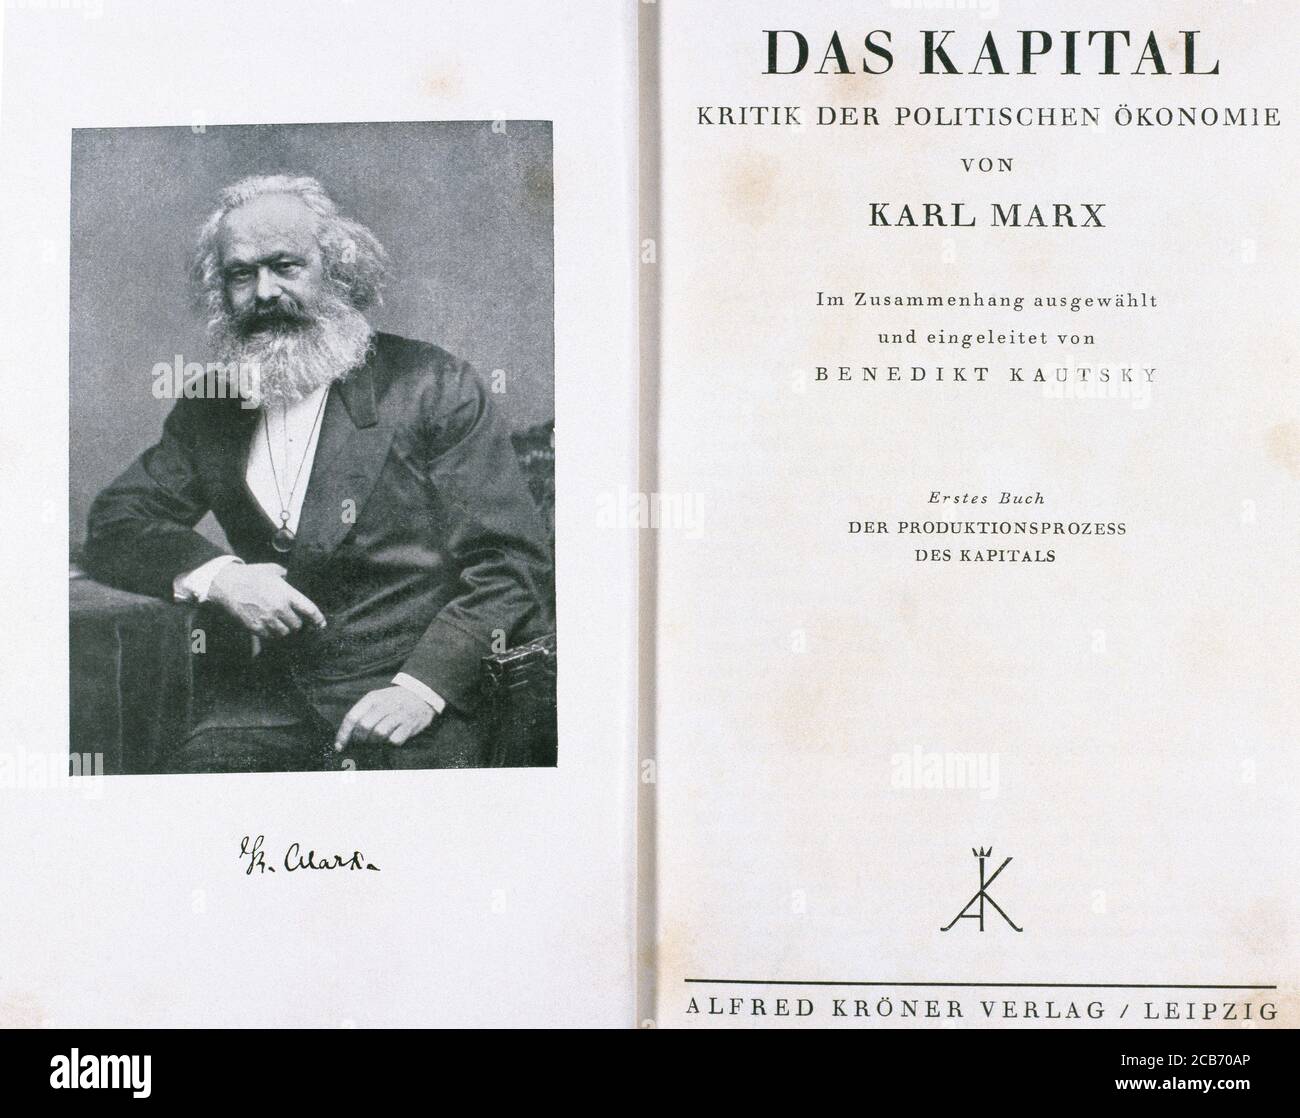 Karl Marx (1818-1883). German philosopher, political theorist, and socialist revolutionary. 'Das Kapital', also called Capital (1867). A Critique of Political Economy (1867). Foundational theoretical text in materialist philosophy, economics and politics by Karl Marx. Edition of 1929. Stock Photo